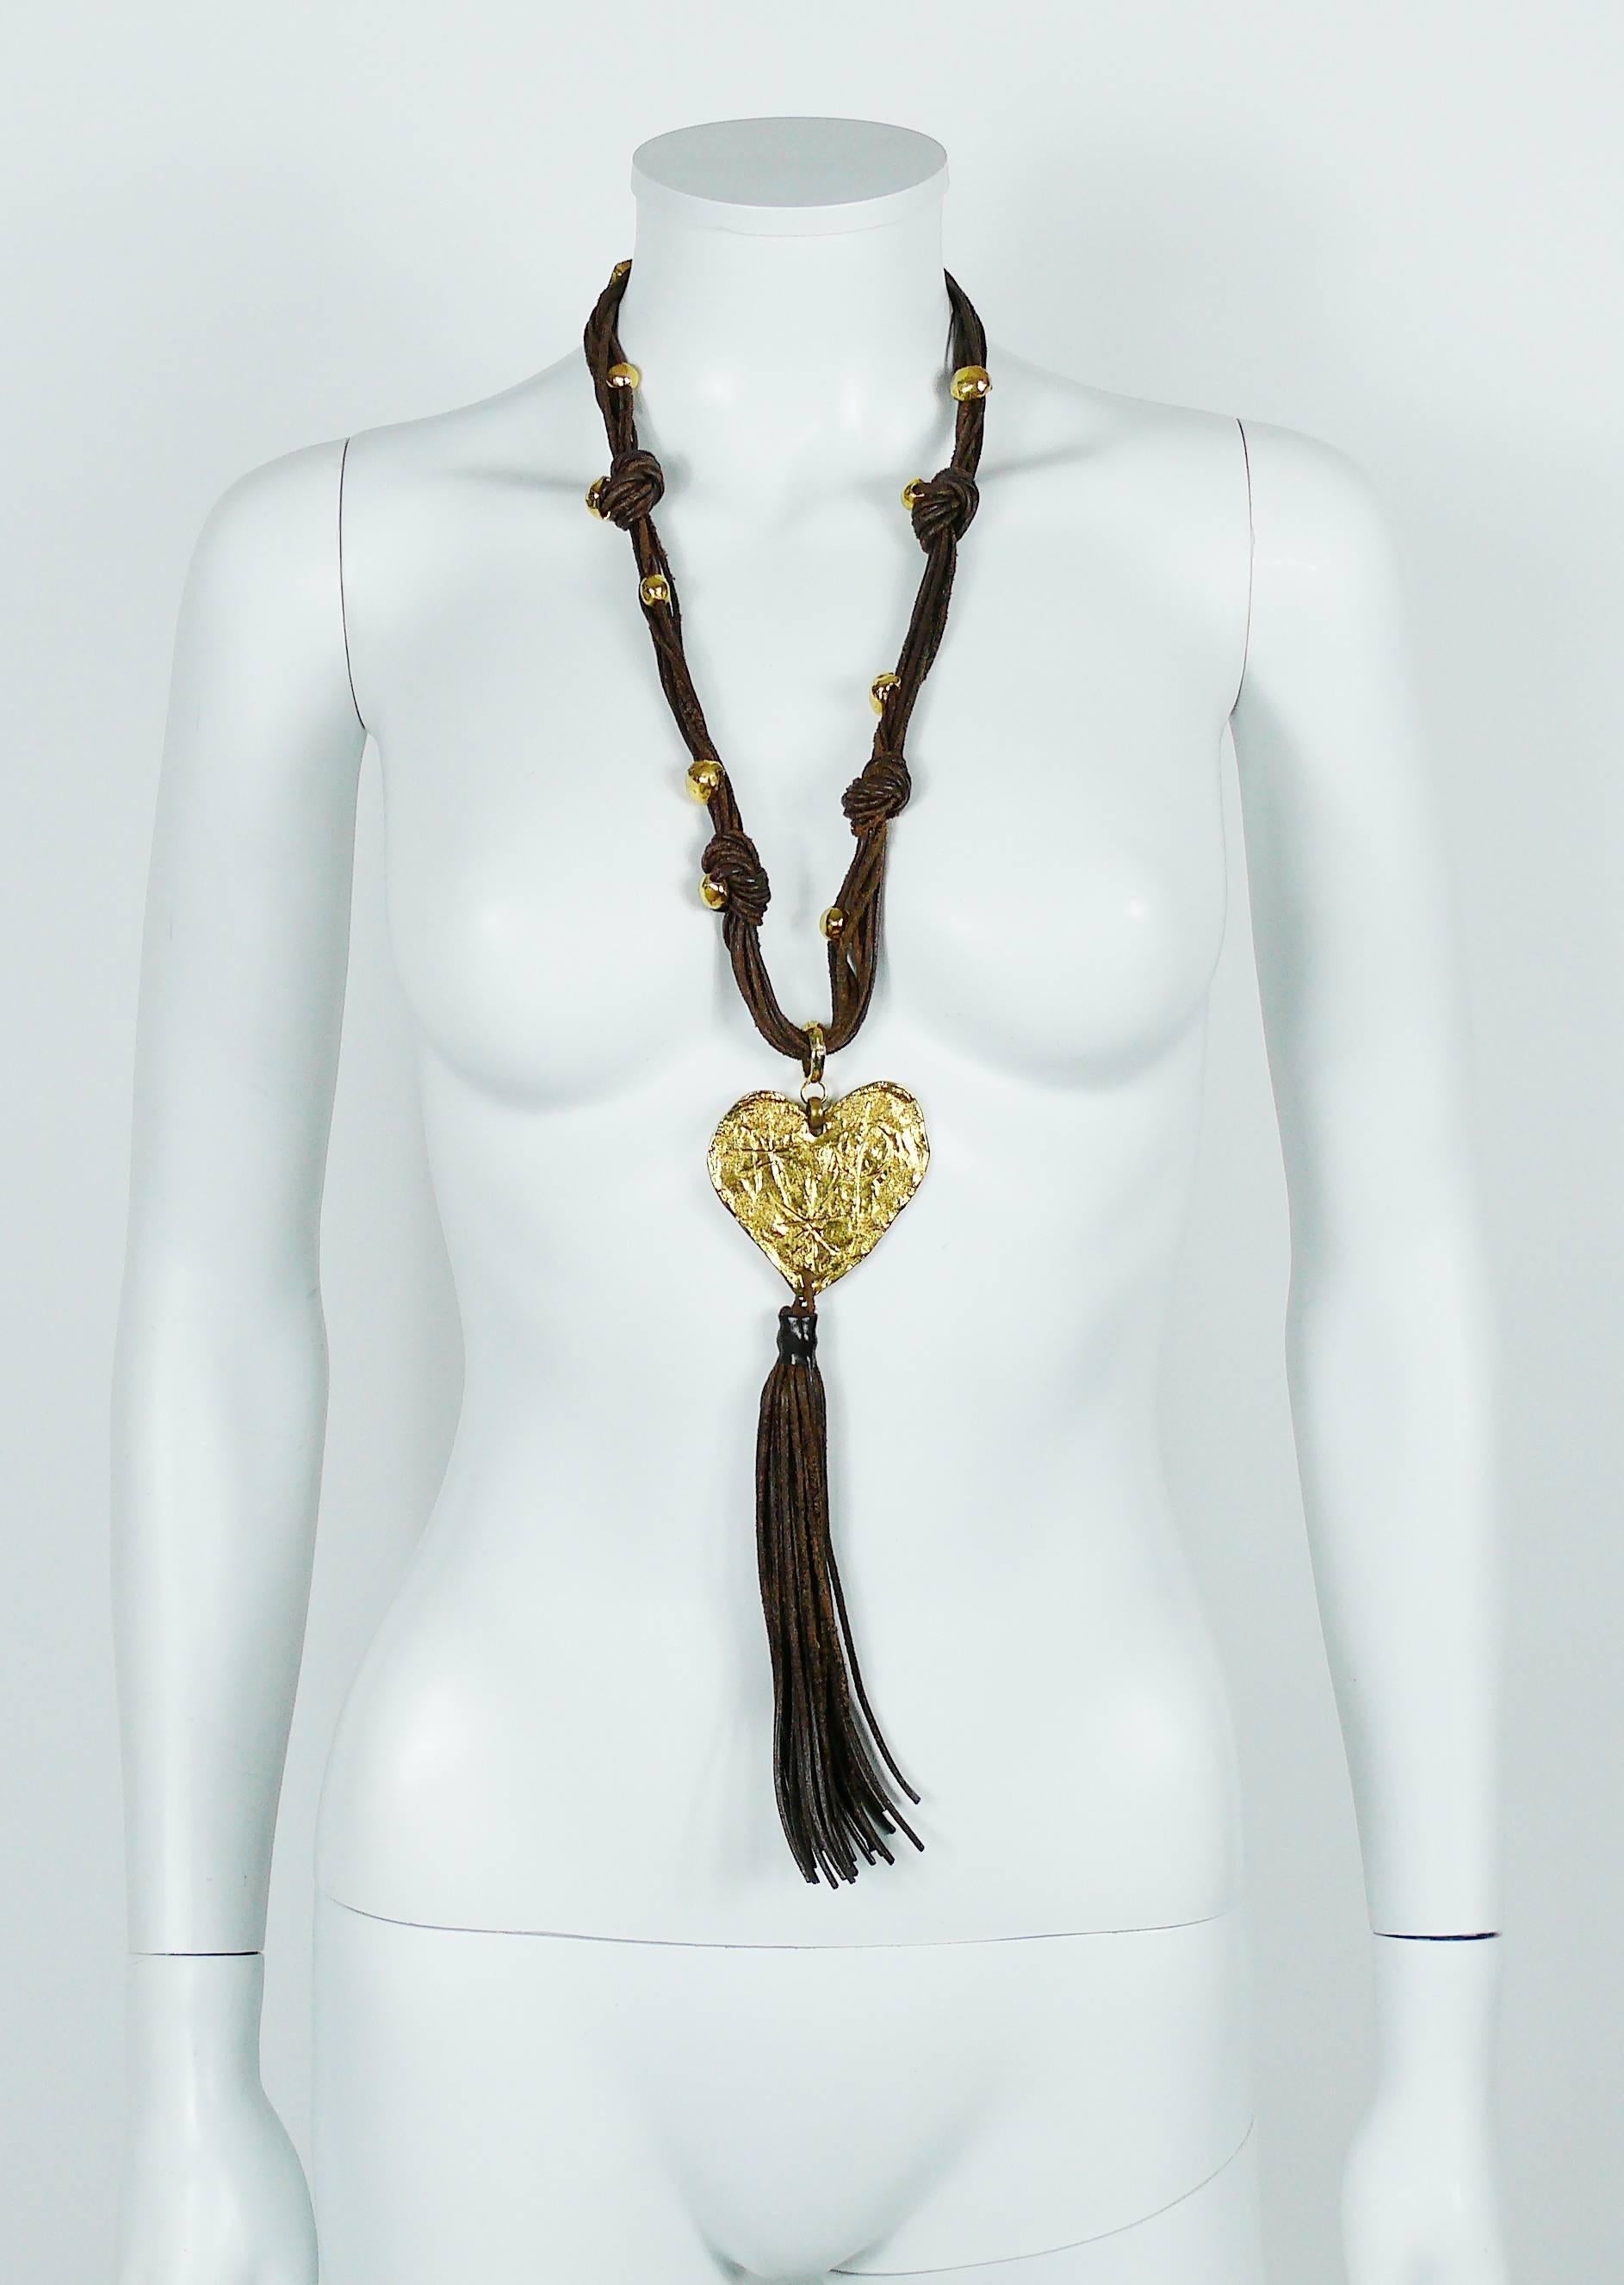 CHRISTIAN LACROIX vintage brown leather sautoir necklace featuring a textured gold toned heart and a long leather tassel.

Marked CHRISTIAN LACROIX CL Made in France.

Indicative measurements : max. length approx. 73 cm (28.74 inches) / heart